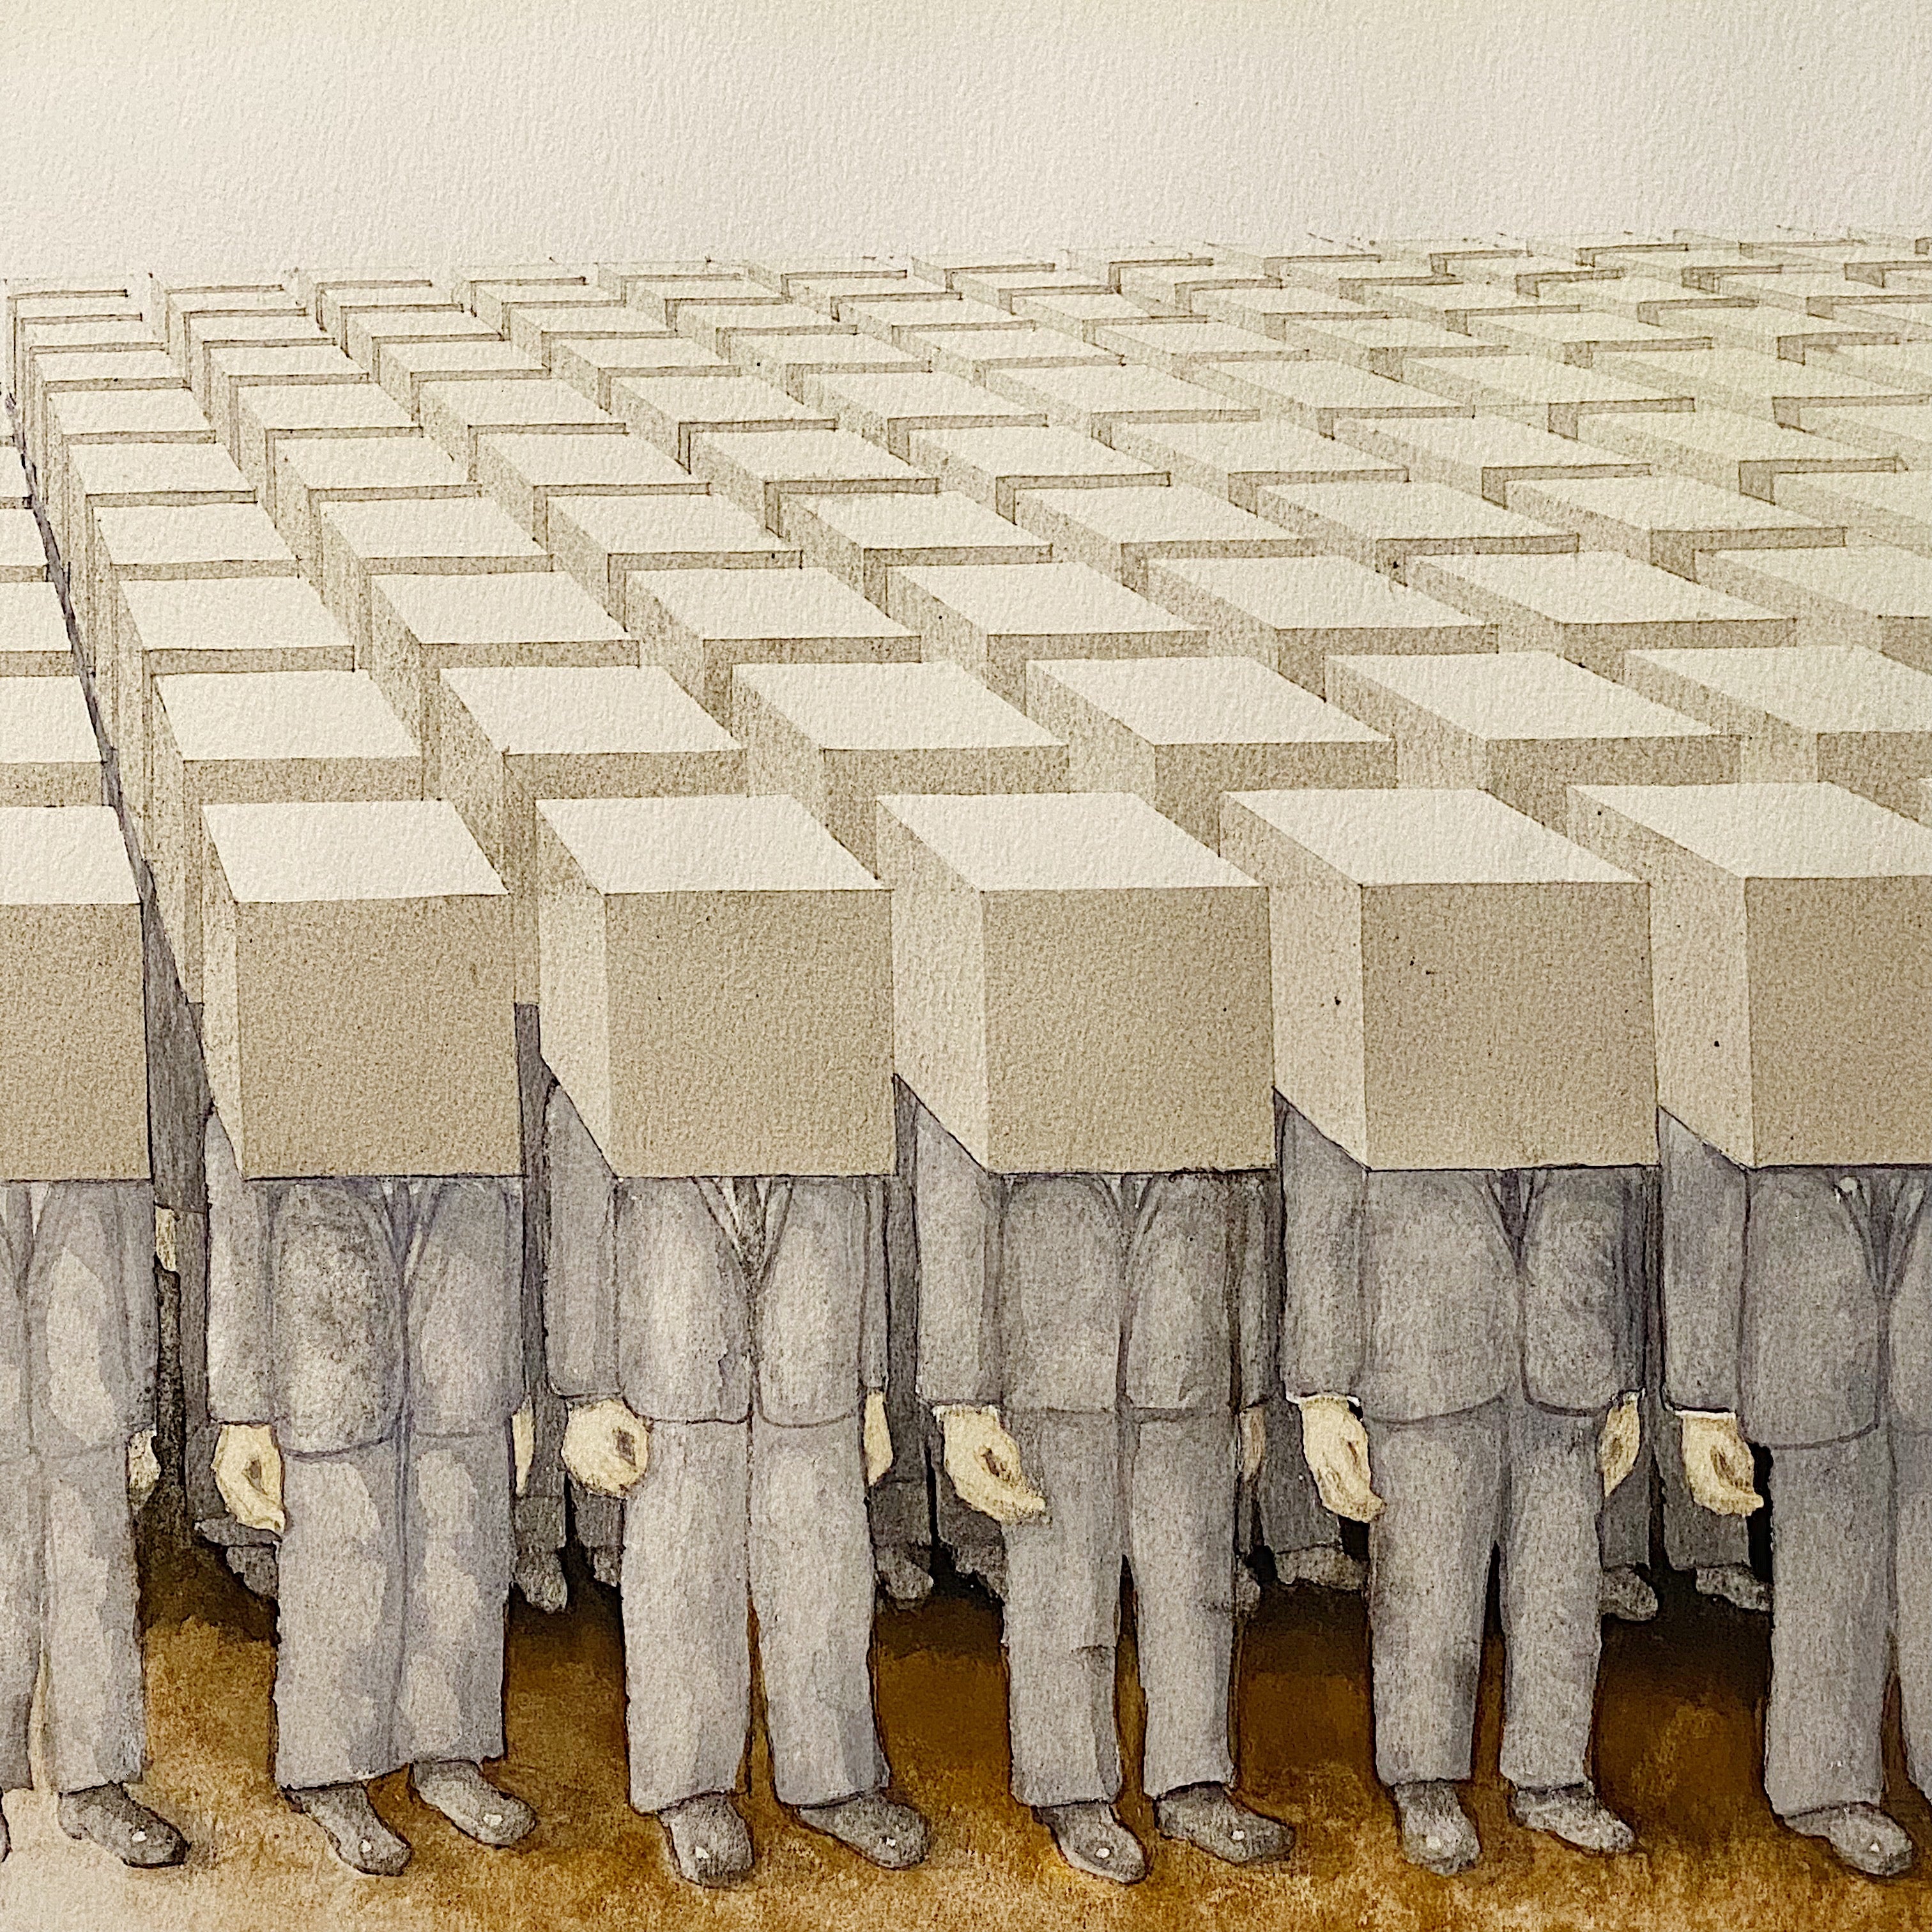 1980s Surreal Painting of Blockhead Suits | Apple Computer